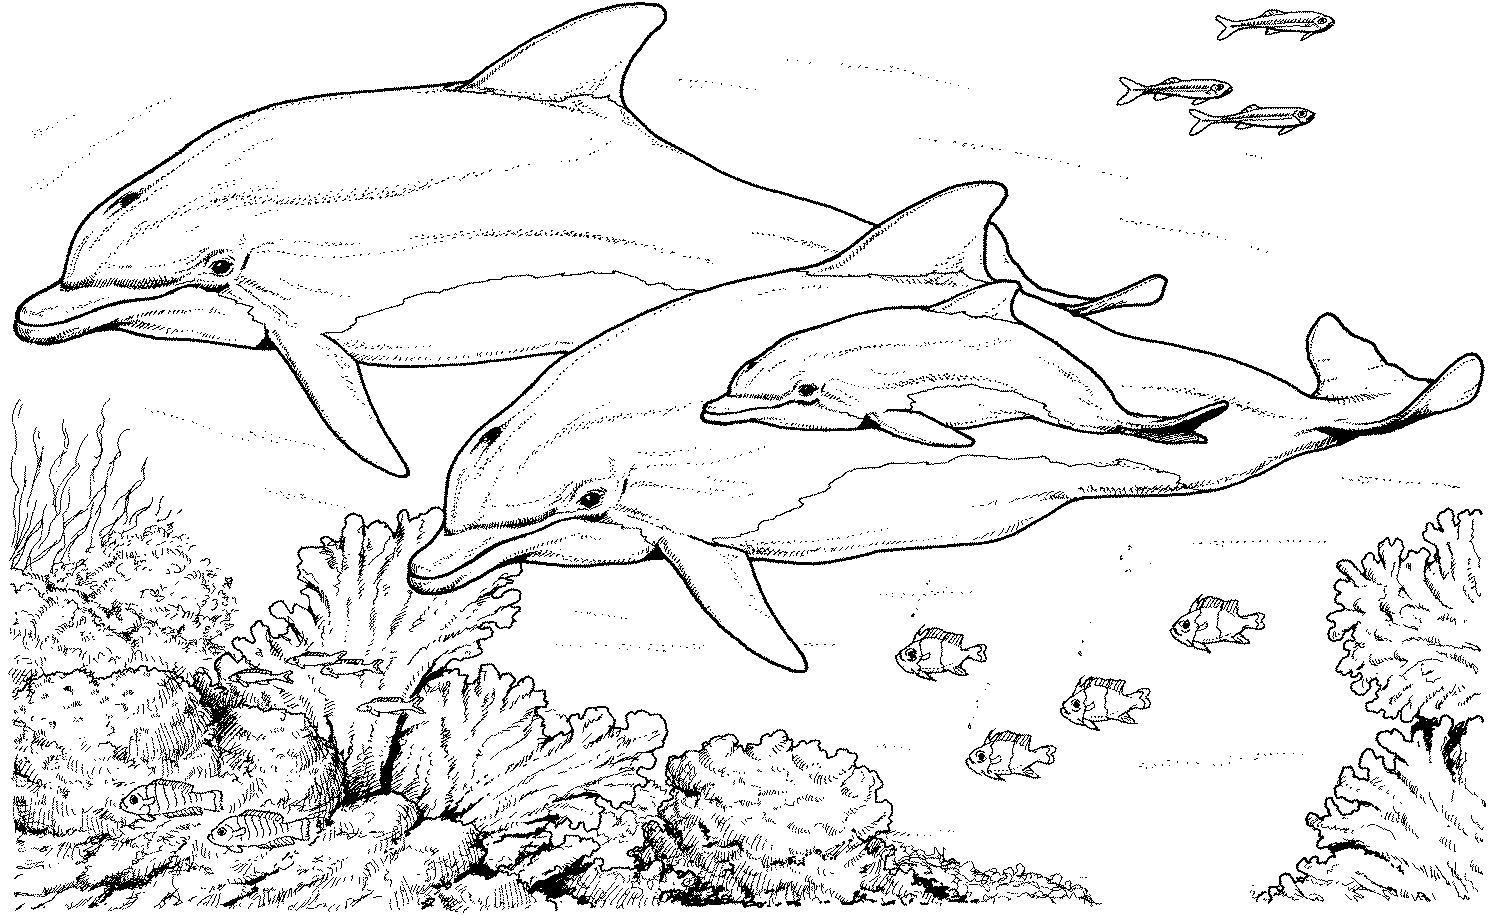 740 Dolphin Coloring Pages Online  Latest HD